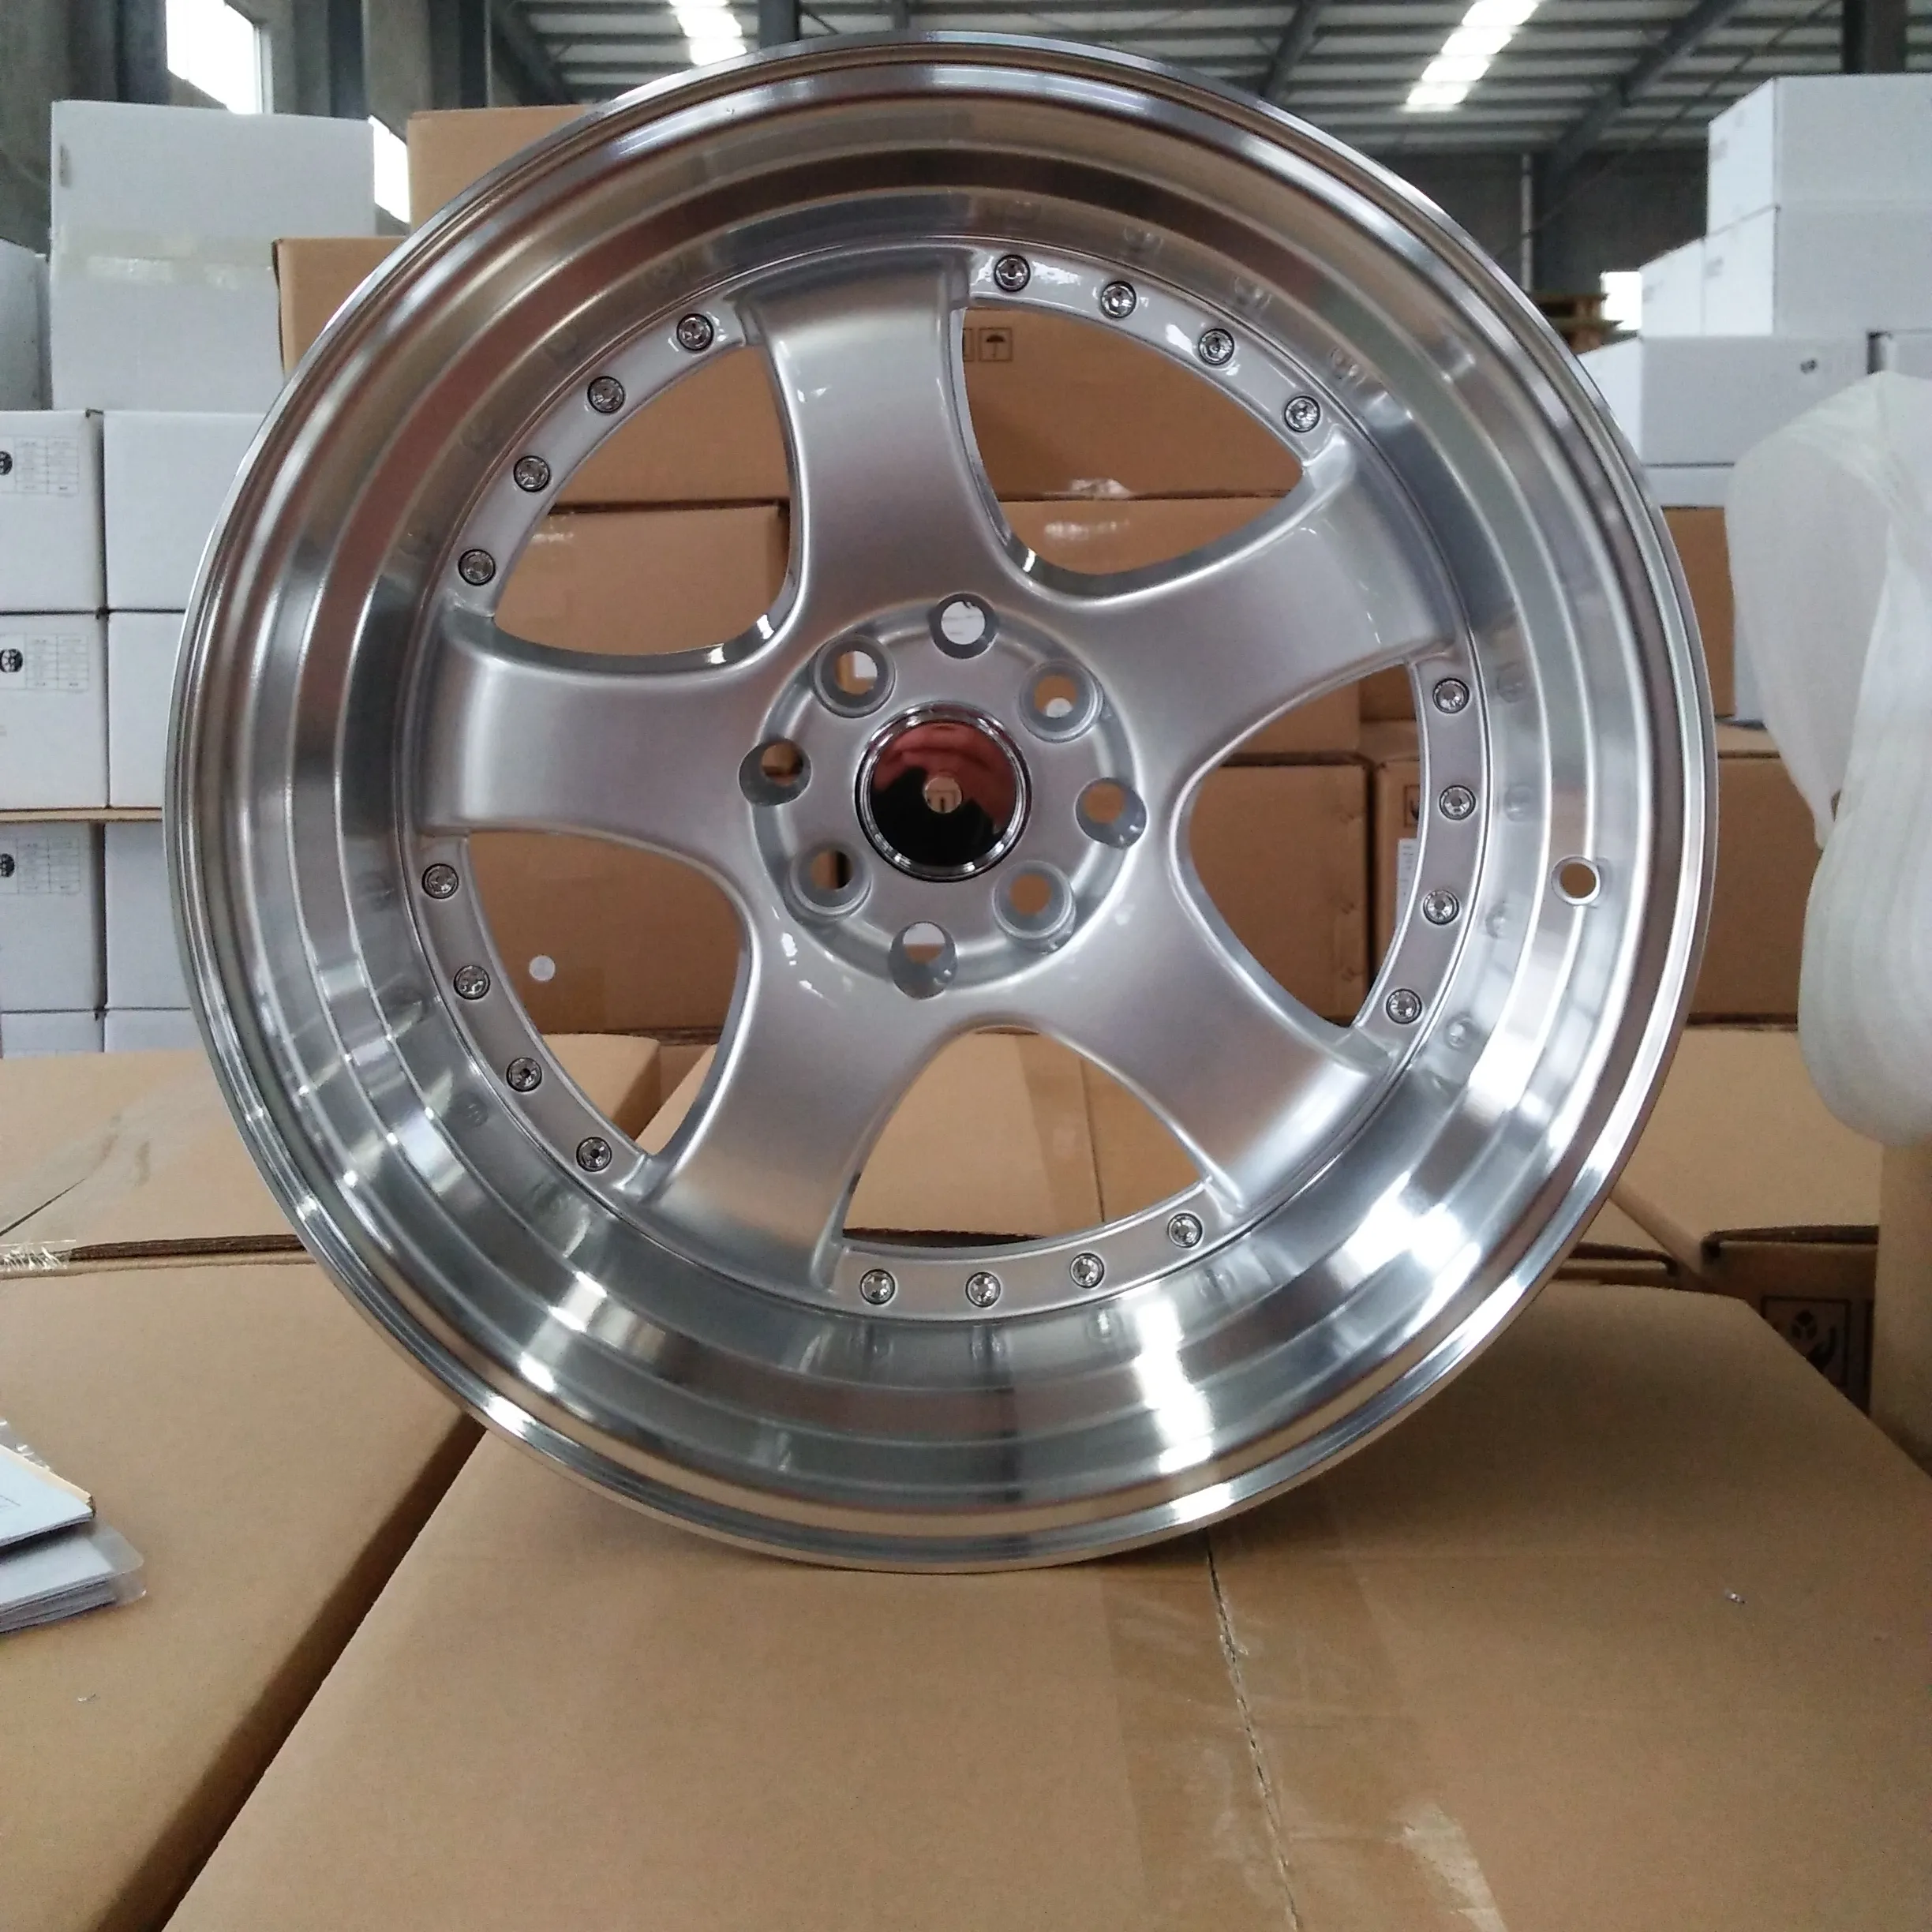 Flrocky Flrocky Professional Manufacture Promotion Price 14X5.5 15 17 18 Inch Aluminum Alloy Casting Car Wheels